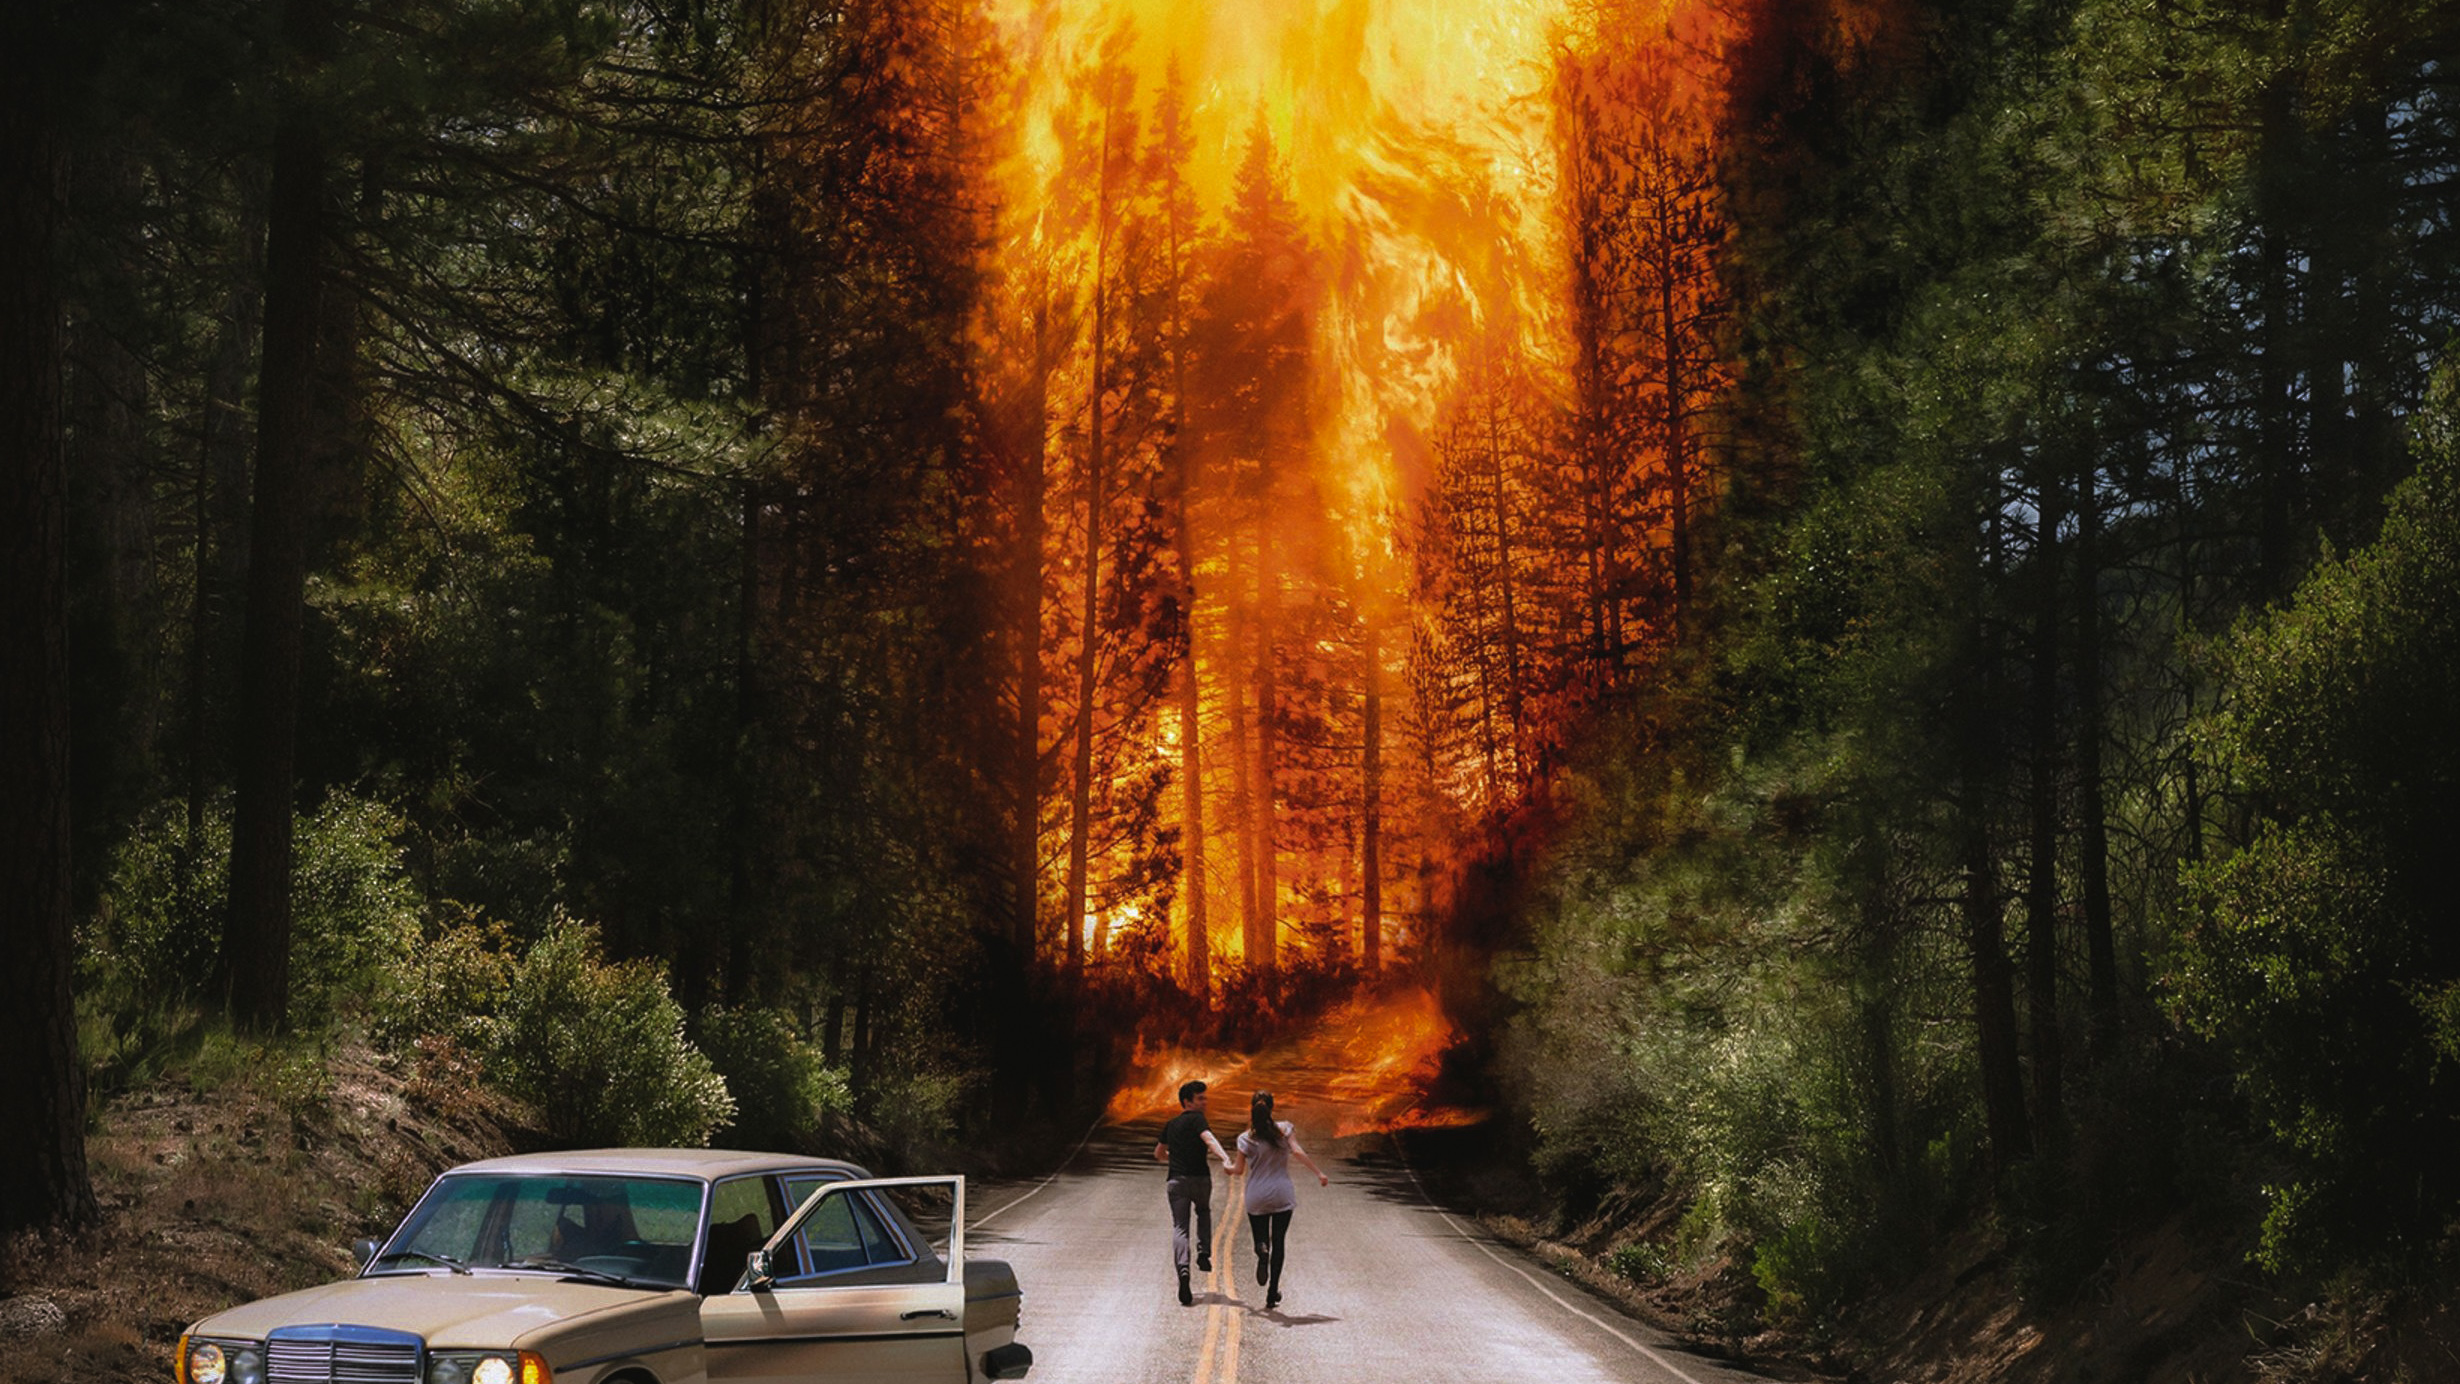 General 2460x1384 Ladytron running couple wildfire pine trees old car photo manipulation forest